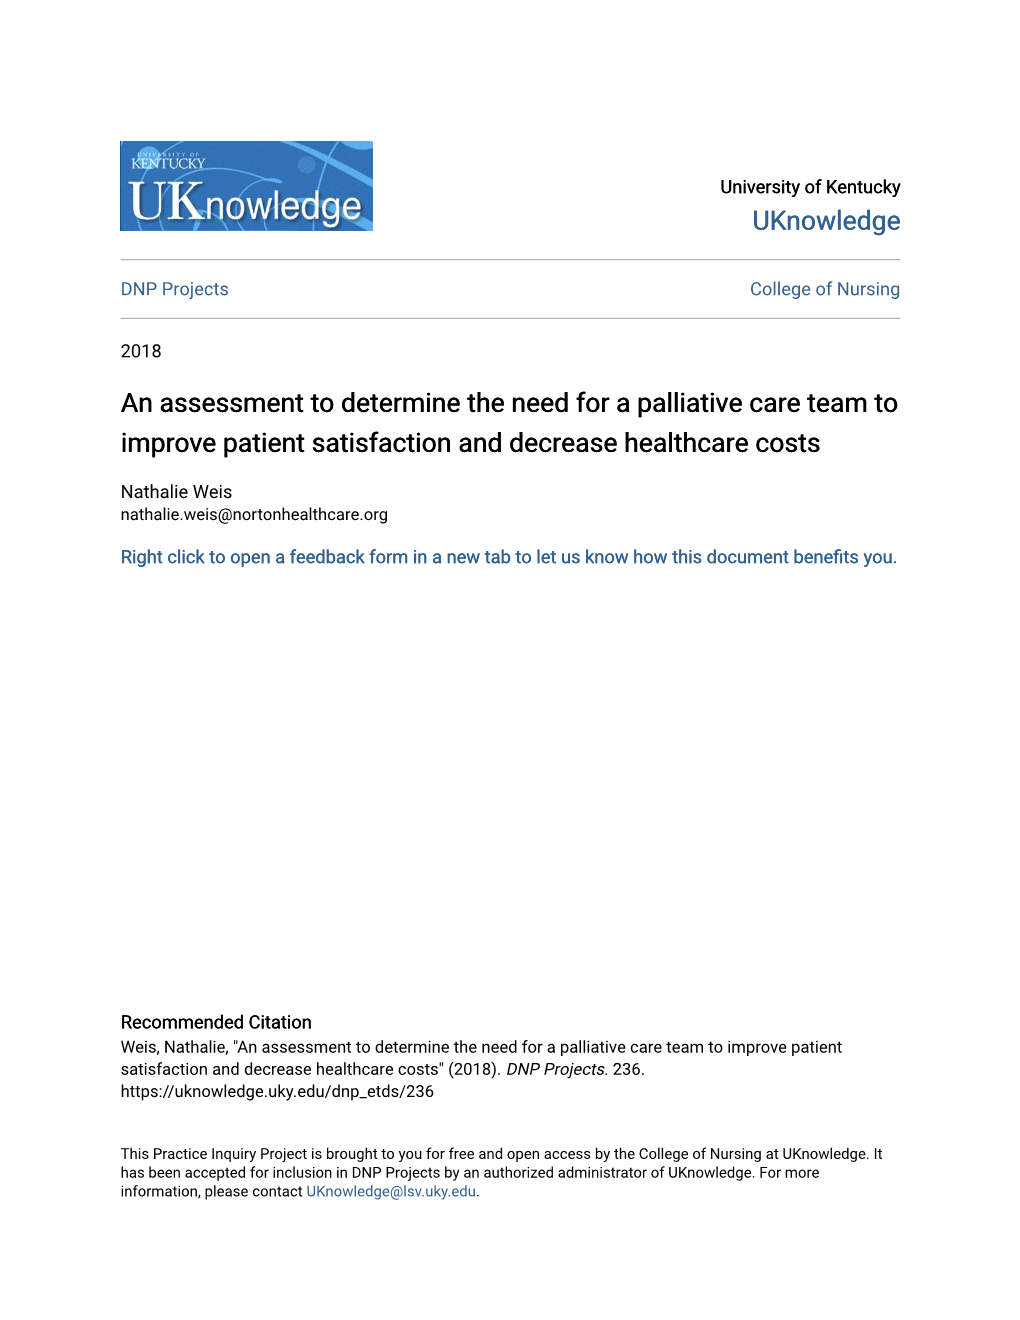 An Assessment to Determine the Need for a Palliative Care Team to Improve Patient Satisfaction and Decrease Healthcare Costs